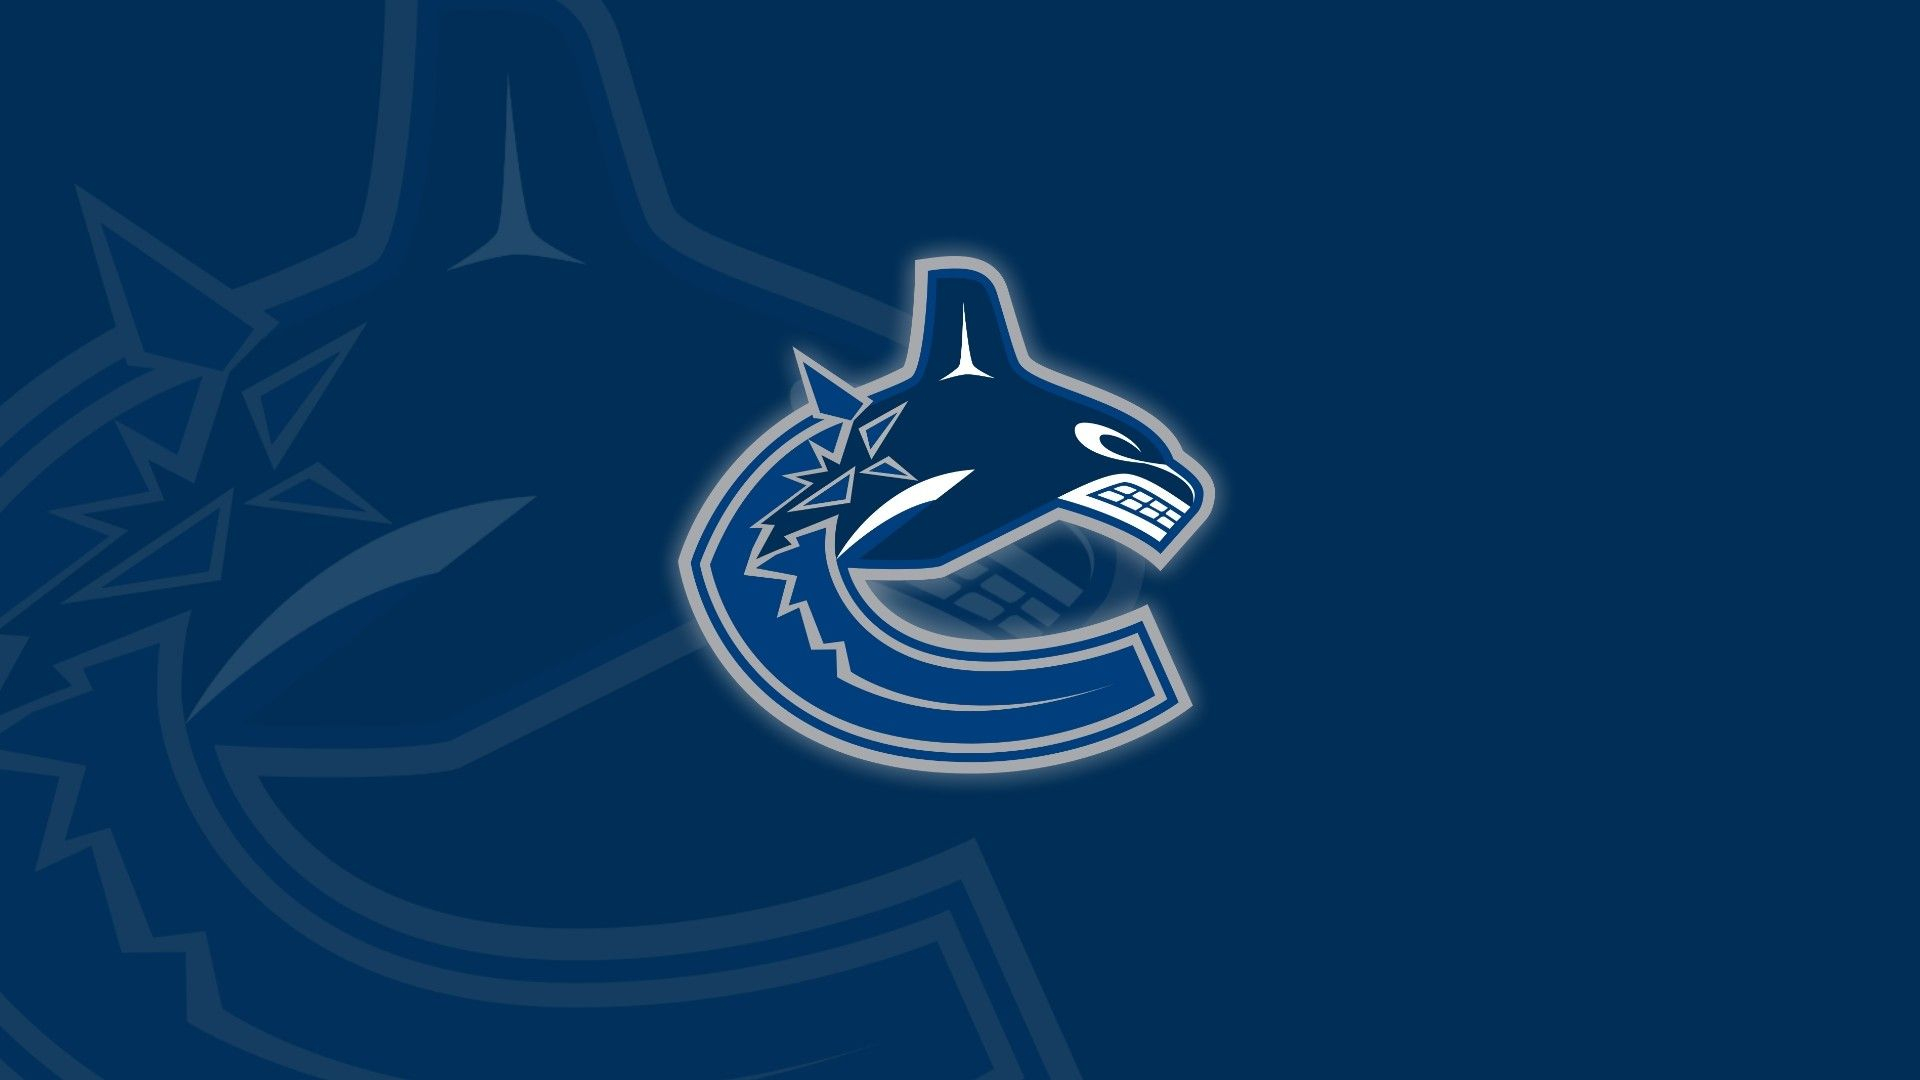 1920x1080 Vancouver Canucks Wallpapers Top Free Vancouver Canucks Backgrounds